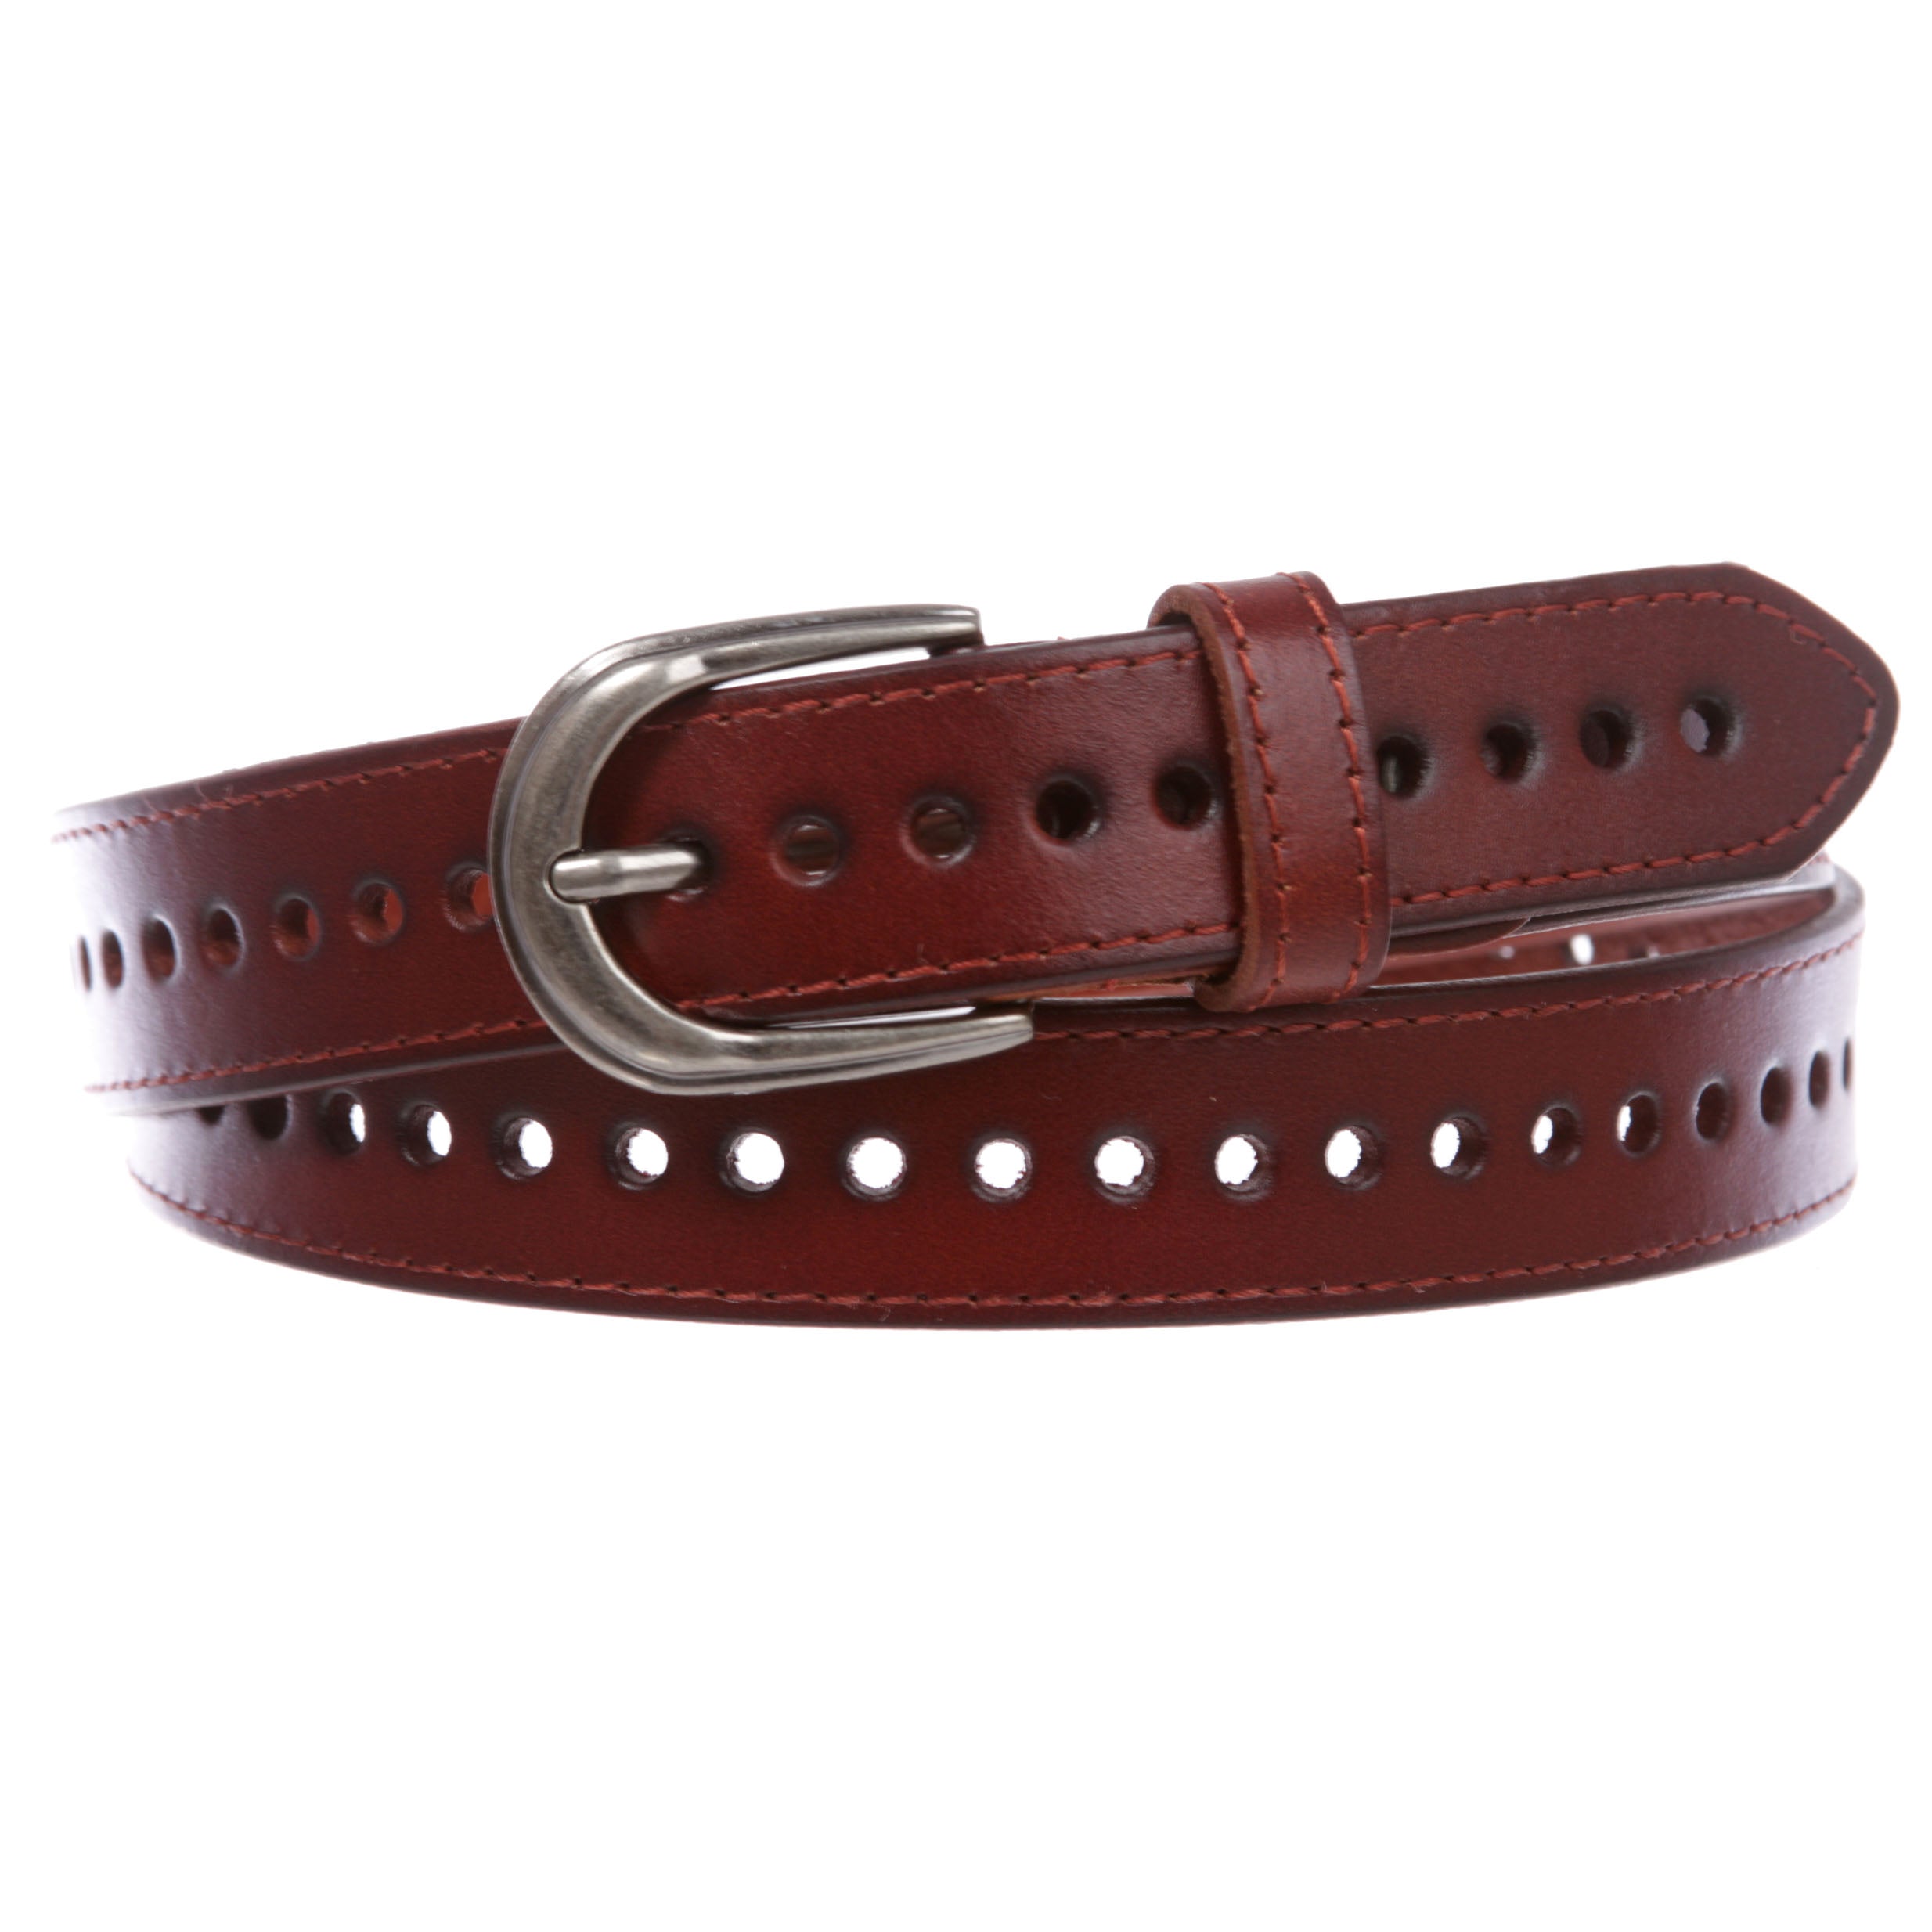 Women's 1 1/8" (28 mm) Perforated Full Grain Leather Edge Stitch Casual Belt